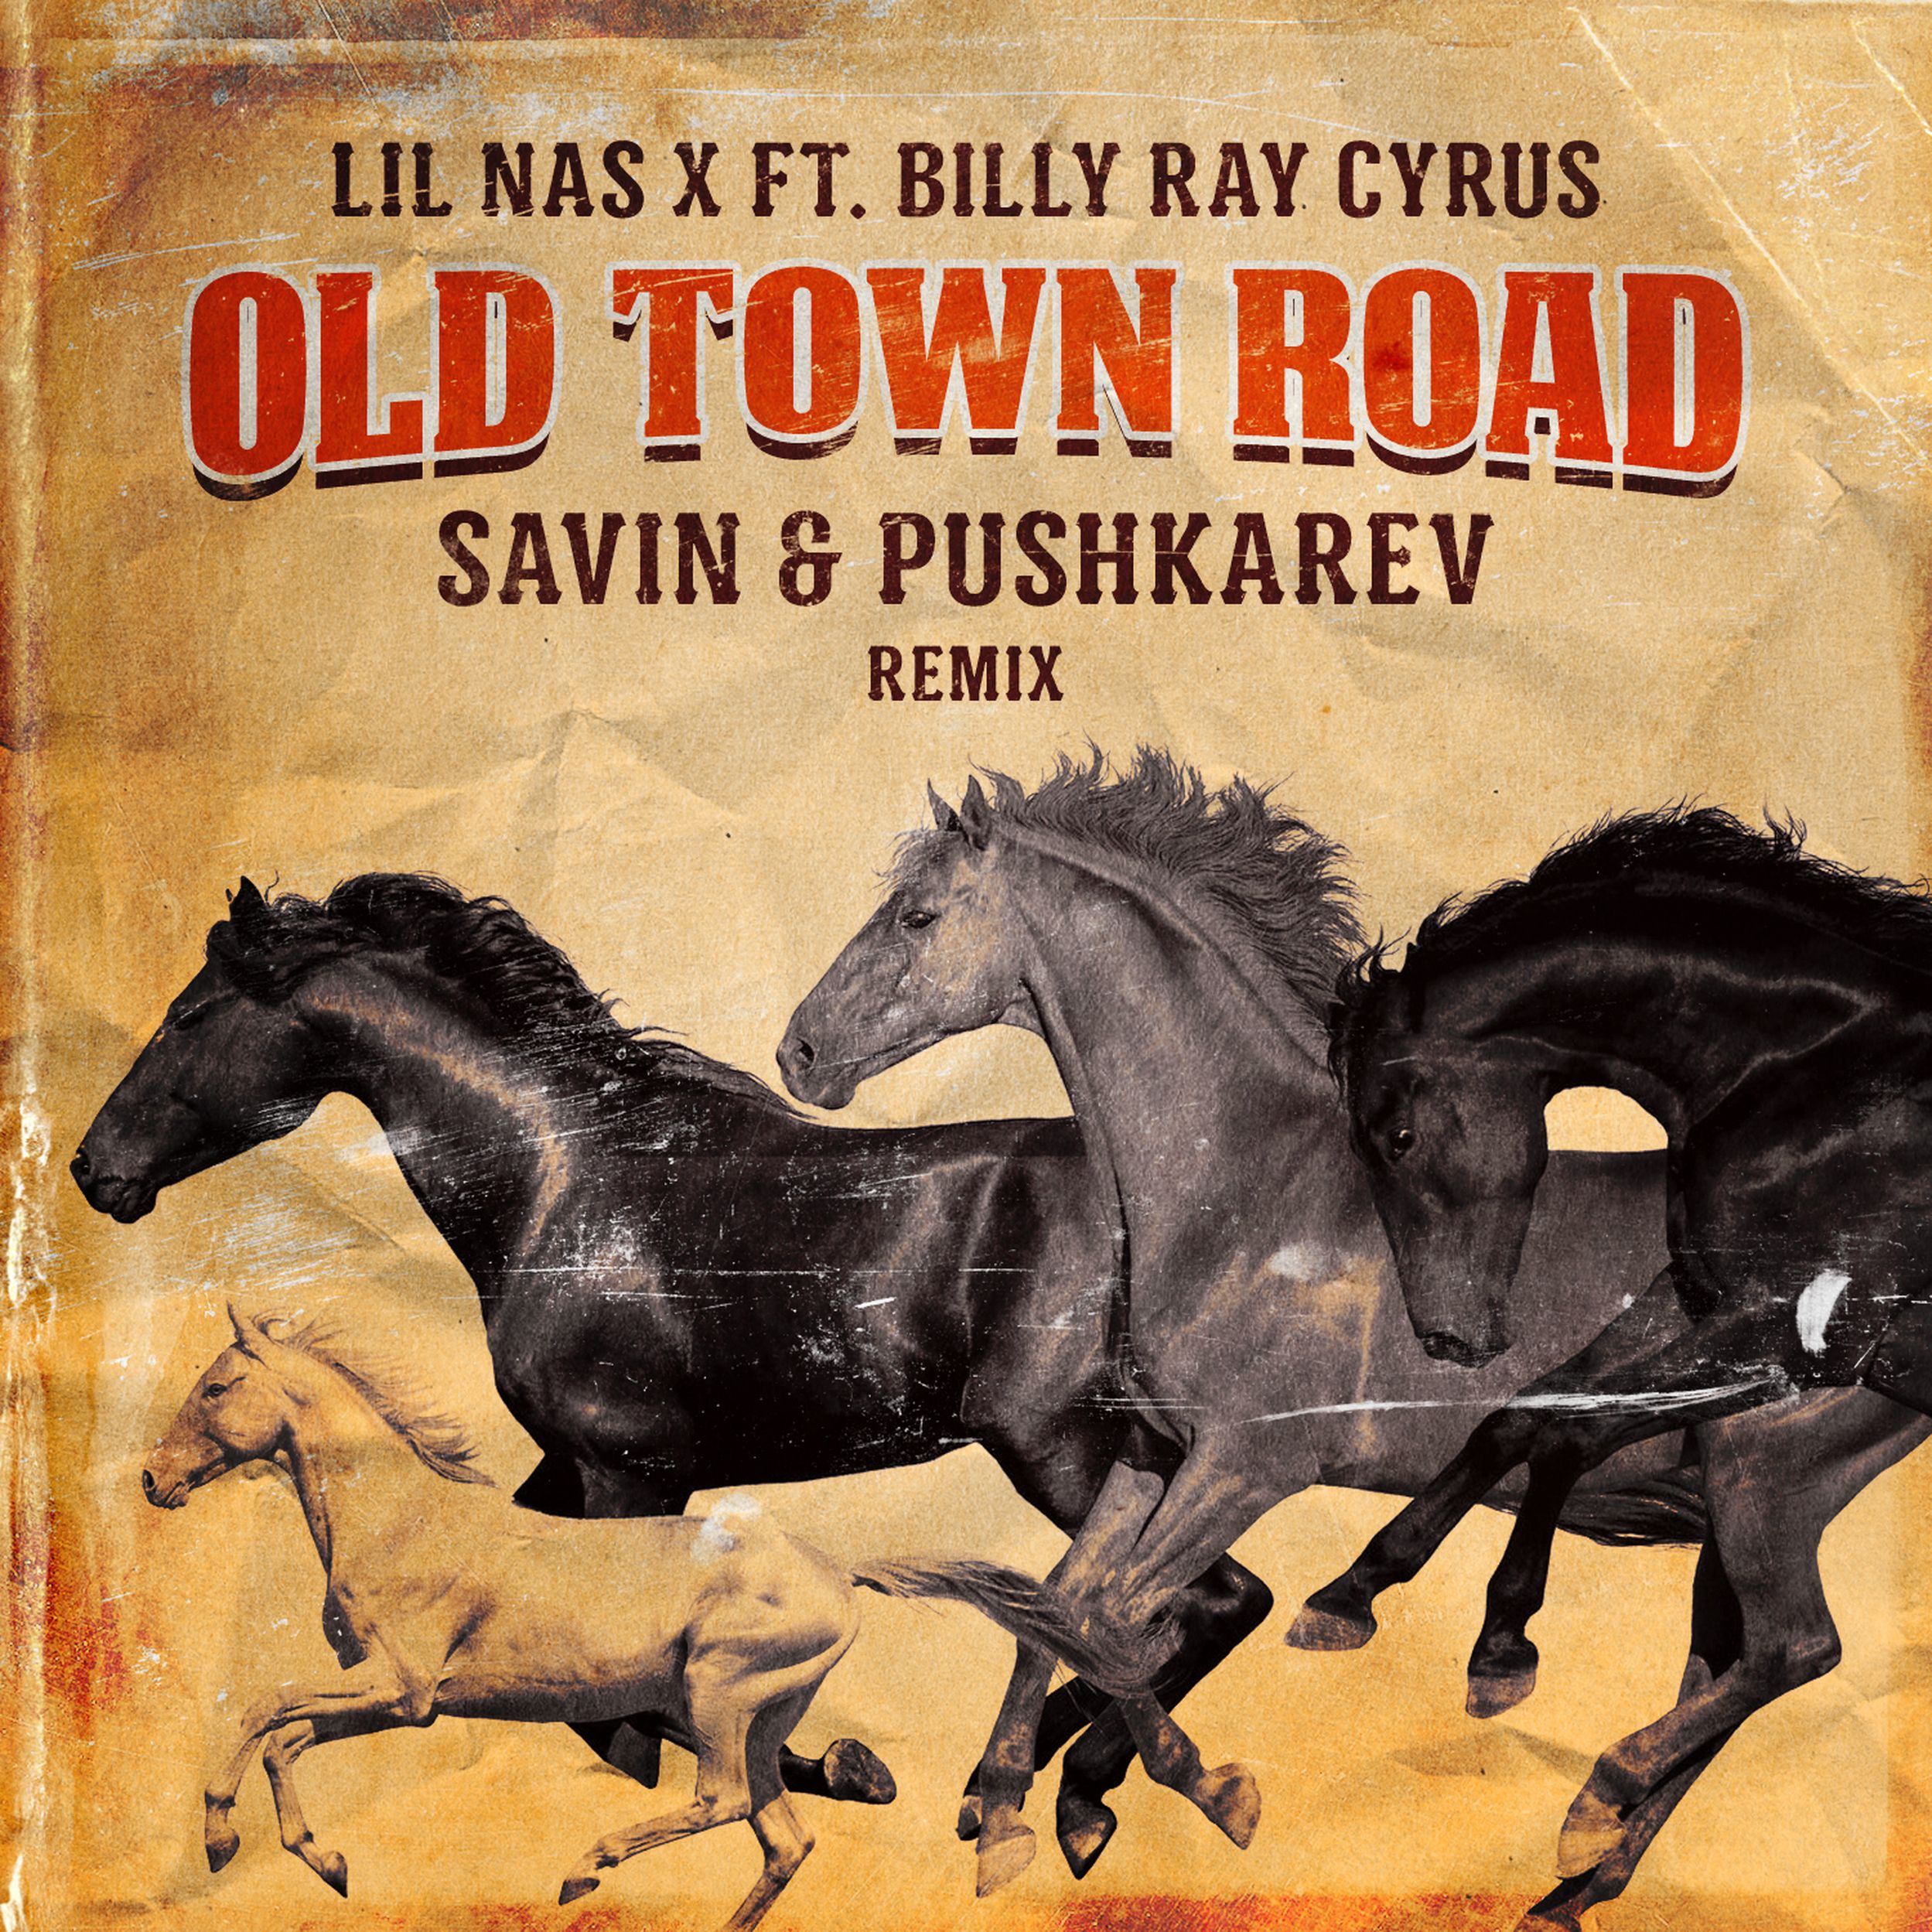 Billy cyrus old town. Lil nas x - old Town Road ft. Billy ray Cyrus. Old Town Road Lil nas x Billy ray Cyrus обложка. Lil nas x old Town Road обложка.